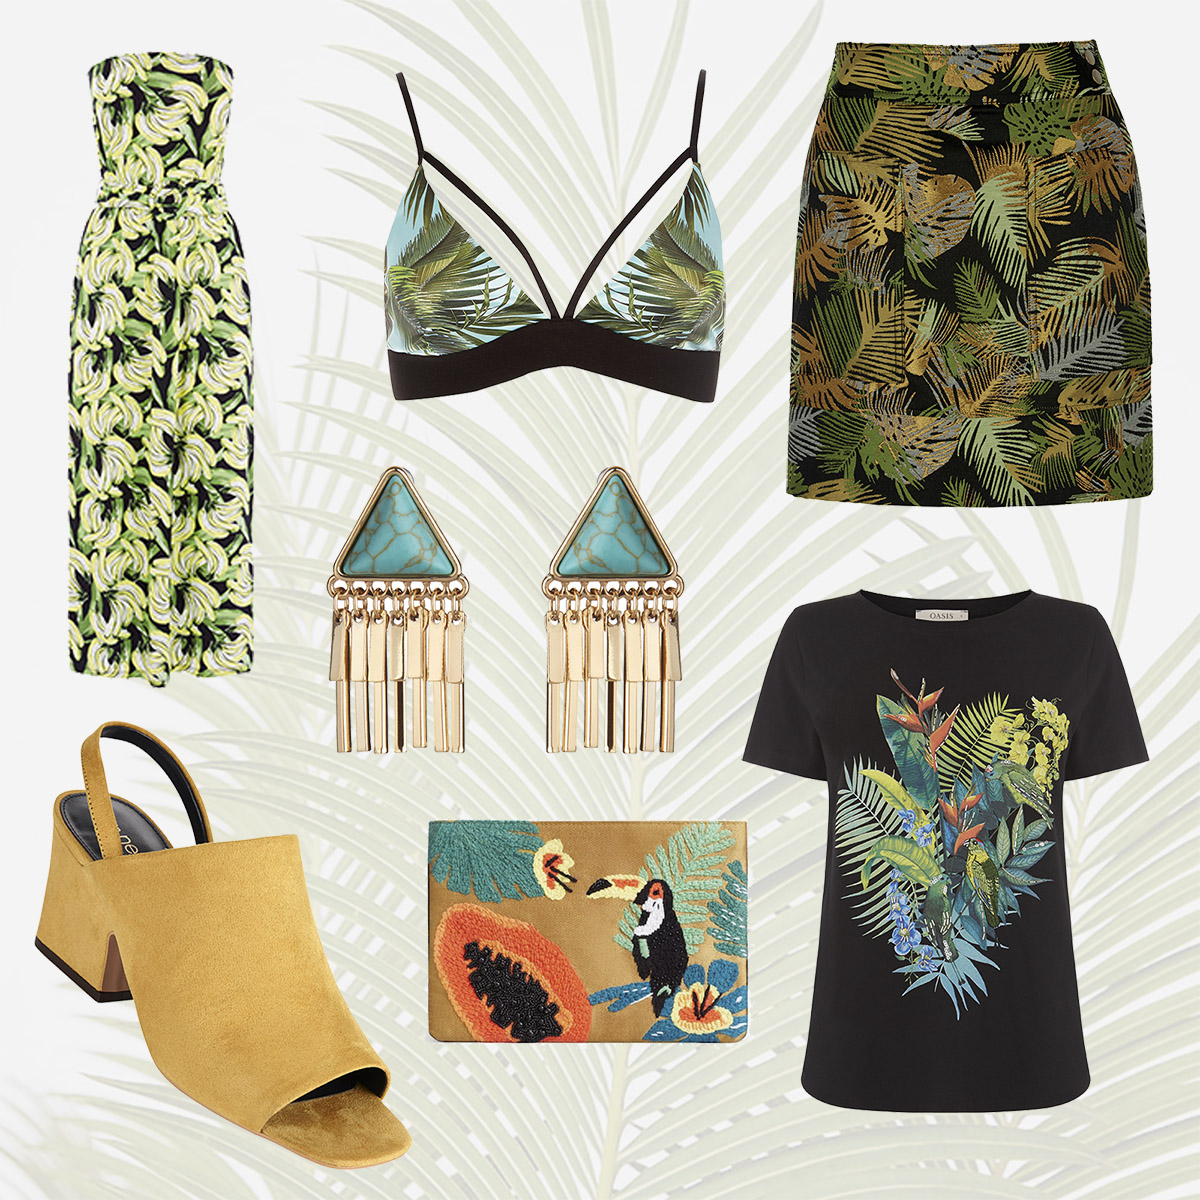 Jungle themed fashion bags, skirts, bikinis, shoes and playsuits at Buchanan Galleries.